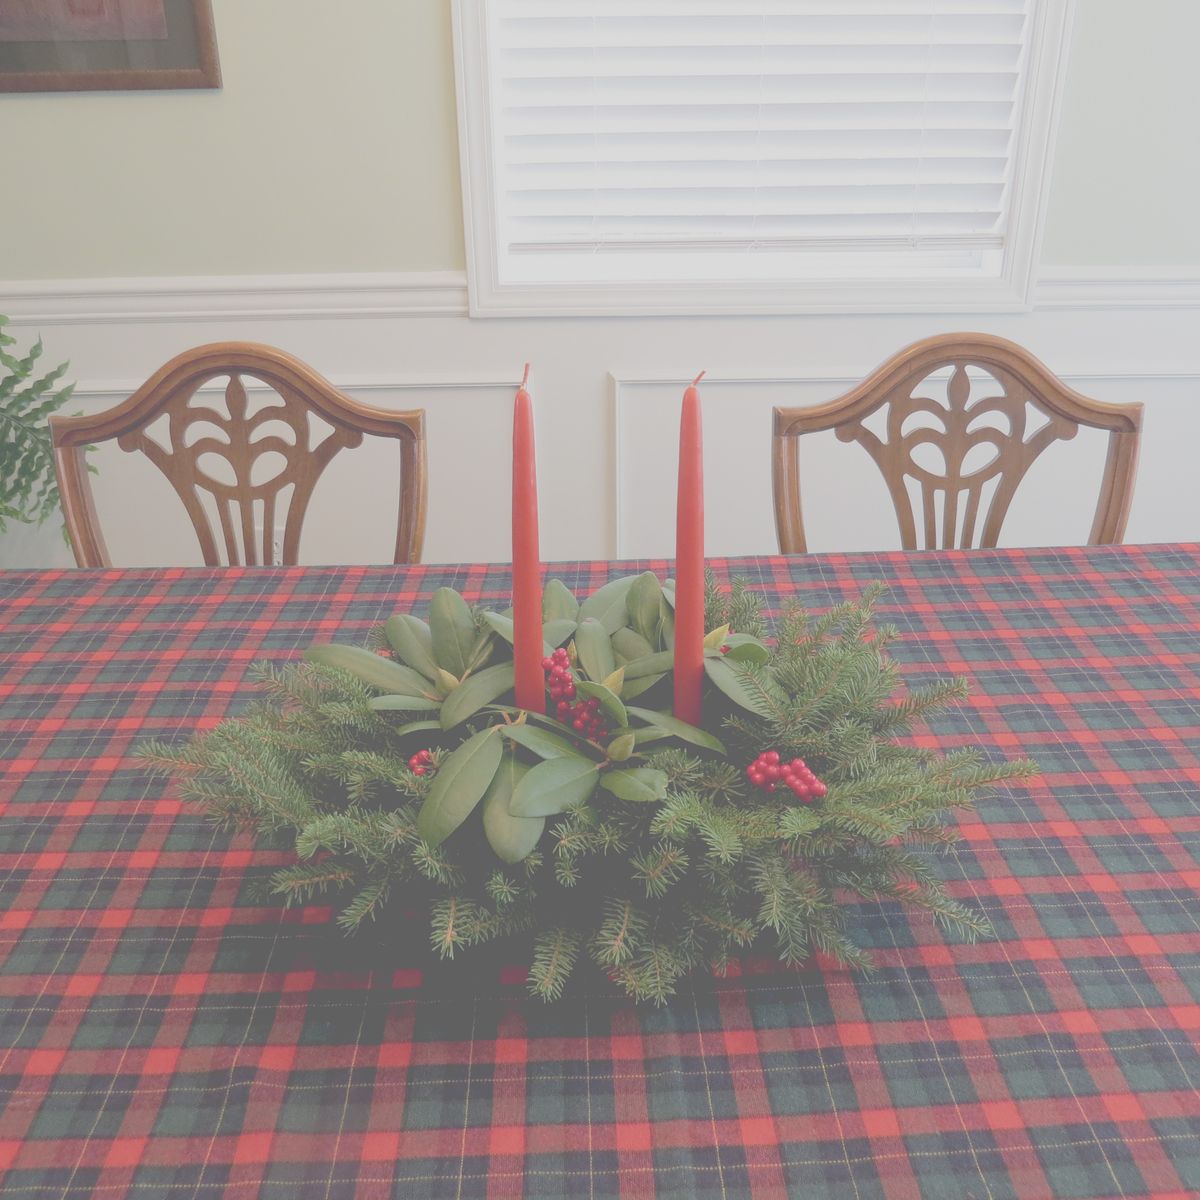 Dress up your holiday table with an attractive, homemade centerpiece. (The Spokesman-Review)